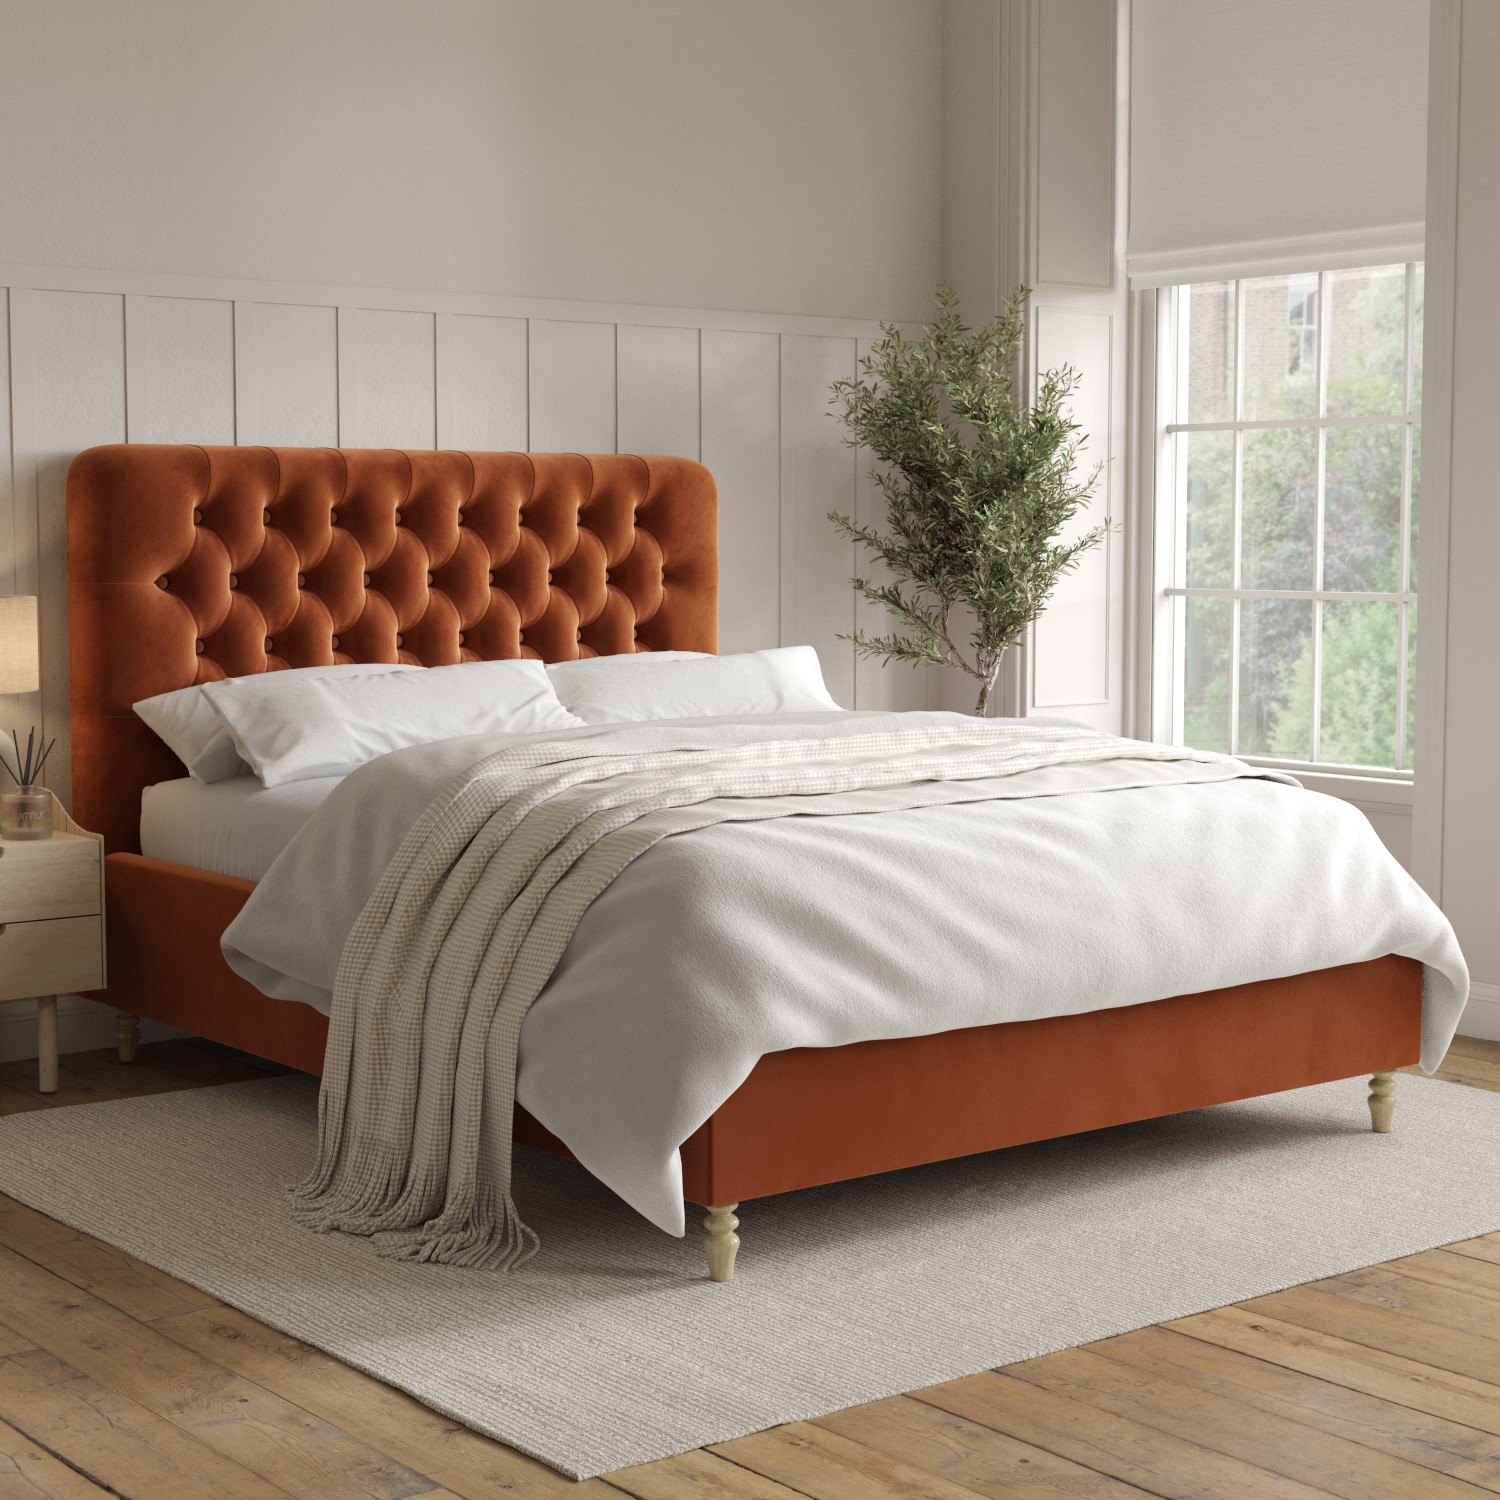 Photo of Rust brown velvet king size ottoman bed with legs - pippa